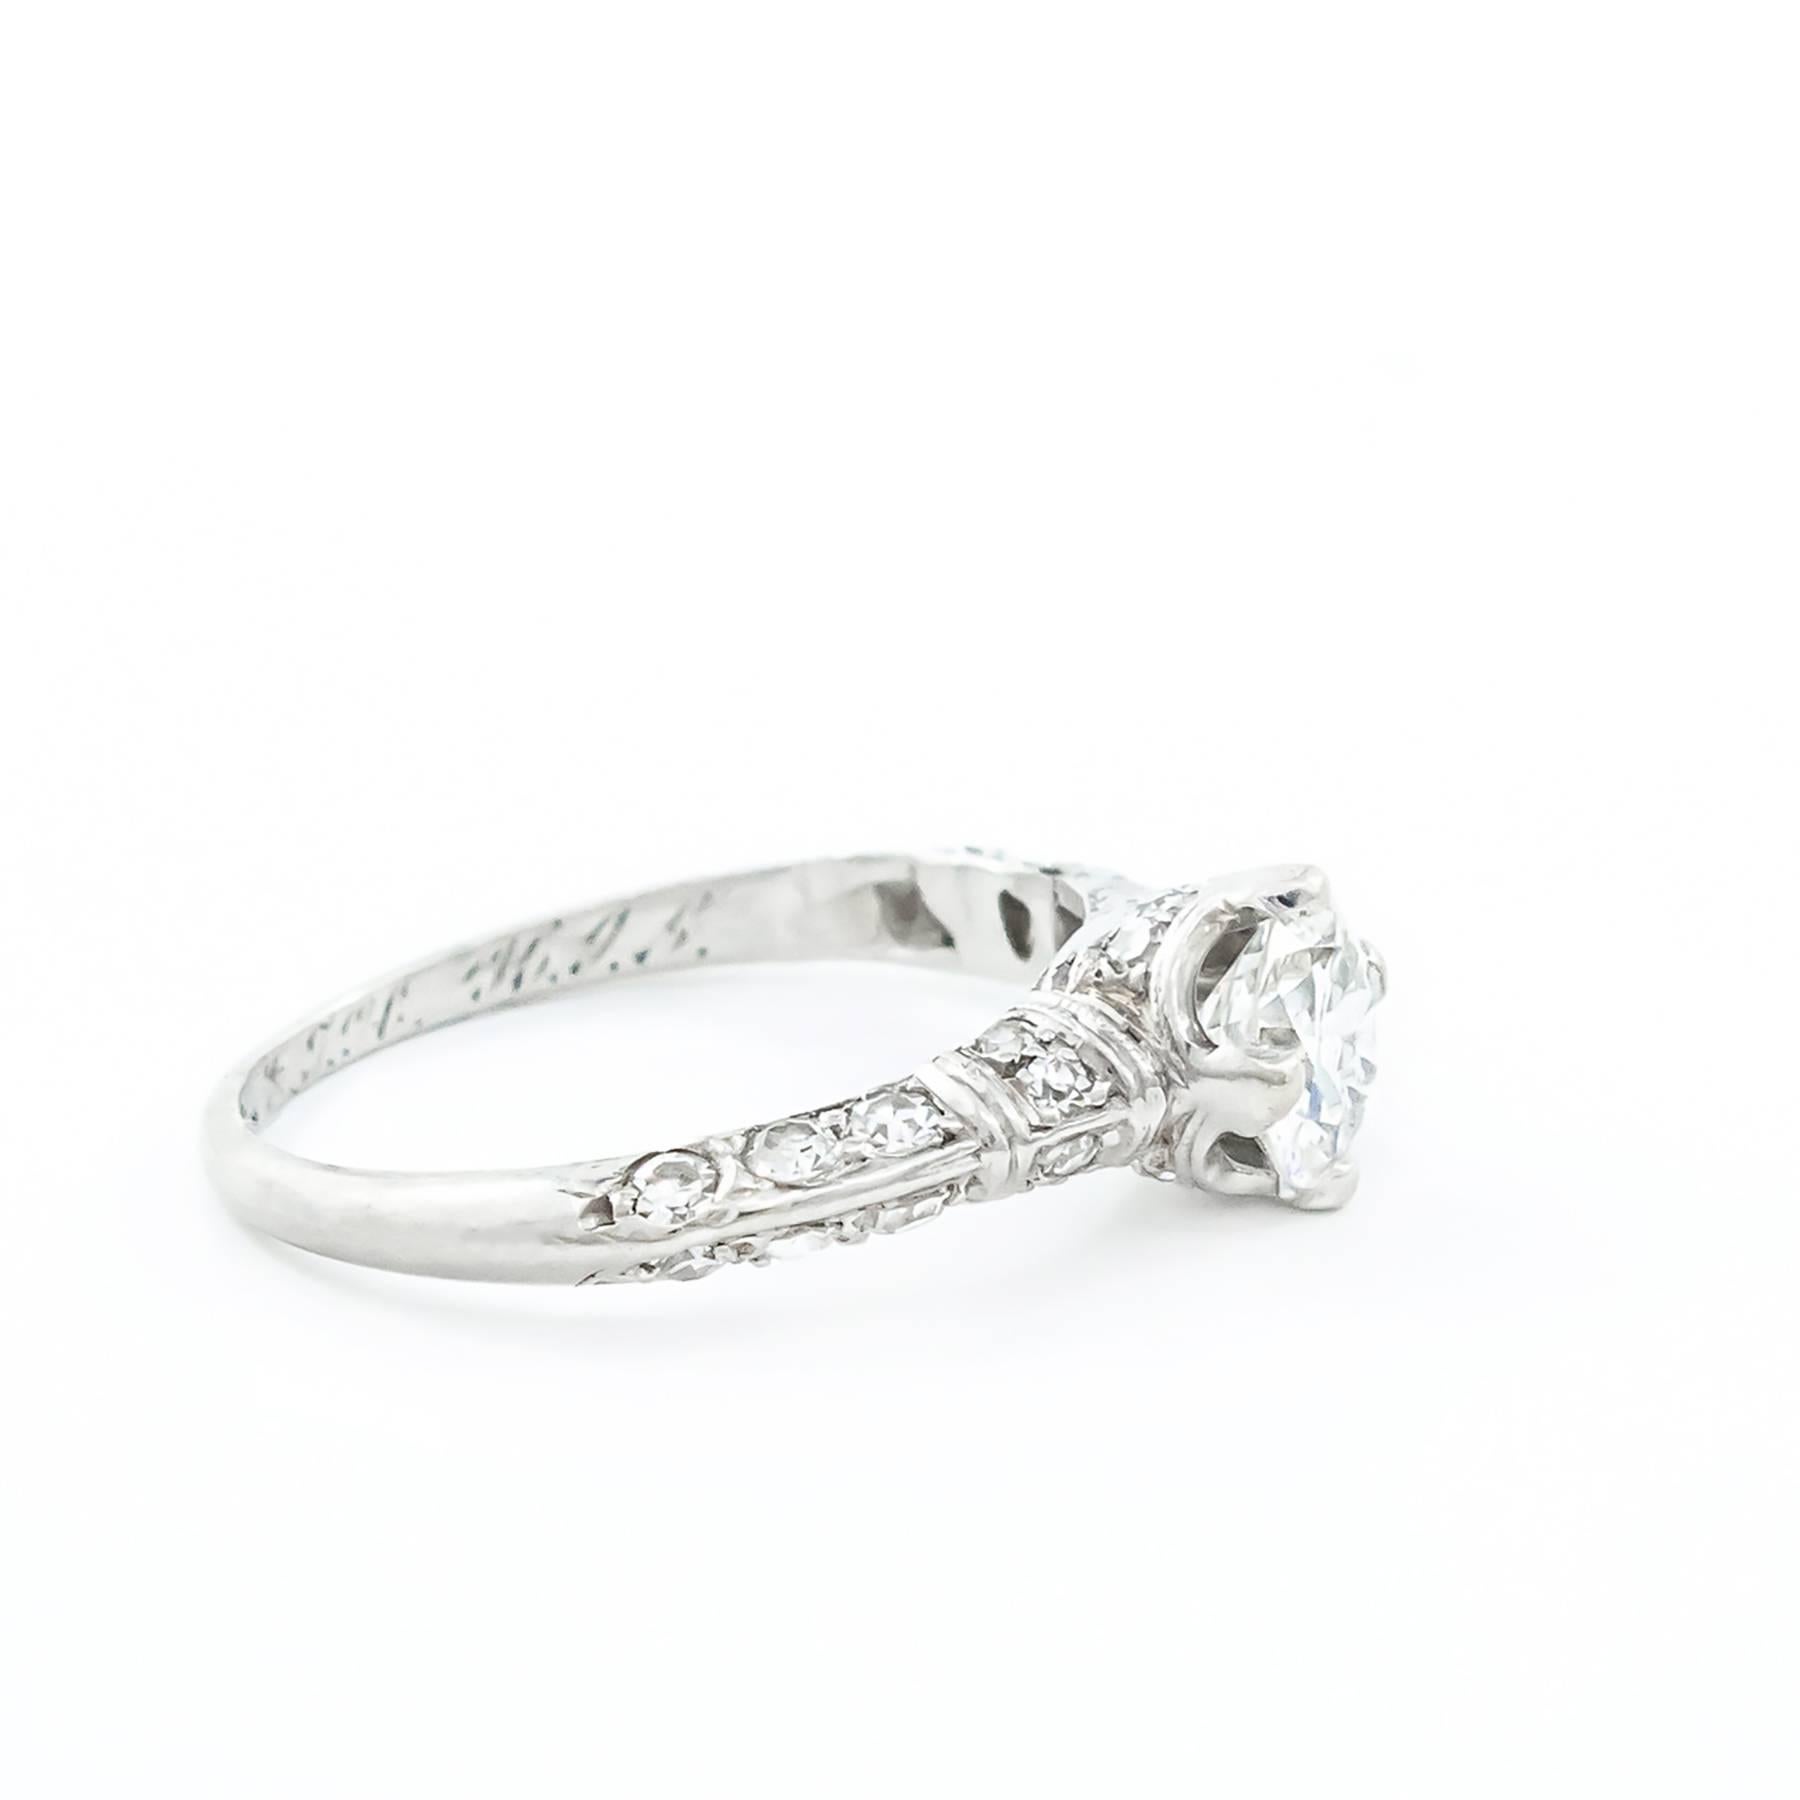 A beautiful Art Deco Platinum Diamond engagement ring. This classic ring is set with a total of one carat of VVS-VVS2 Diamonds. Custom crafted, milgrain and exquisitely detailed by Birks of Canada.

The unique and elegant mount features 26 round,